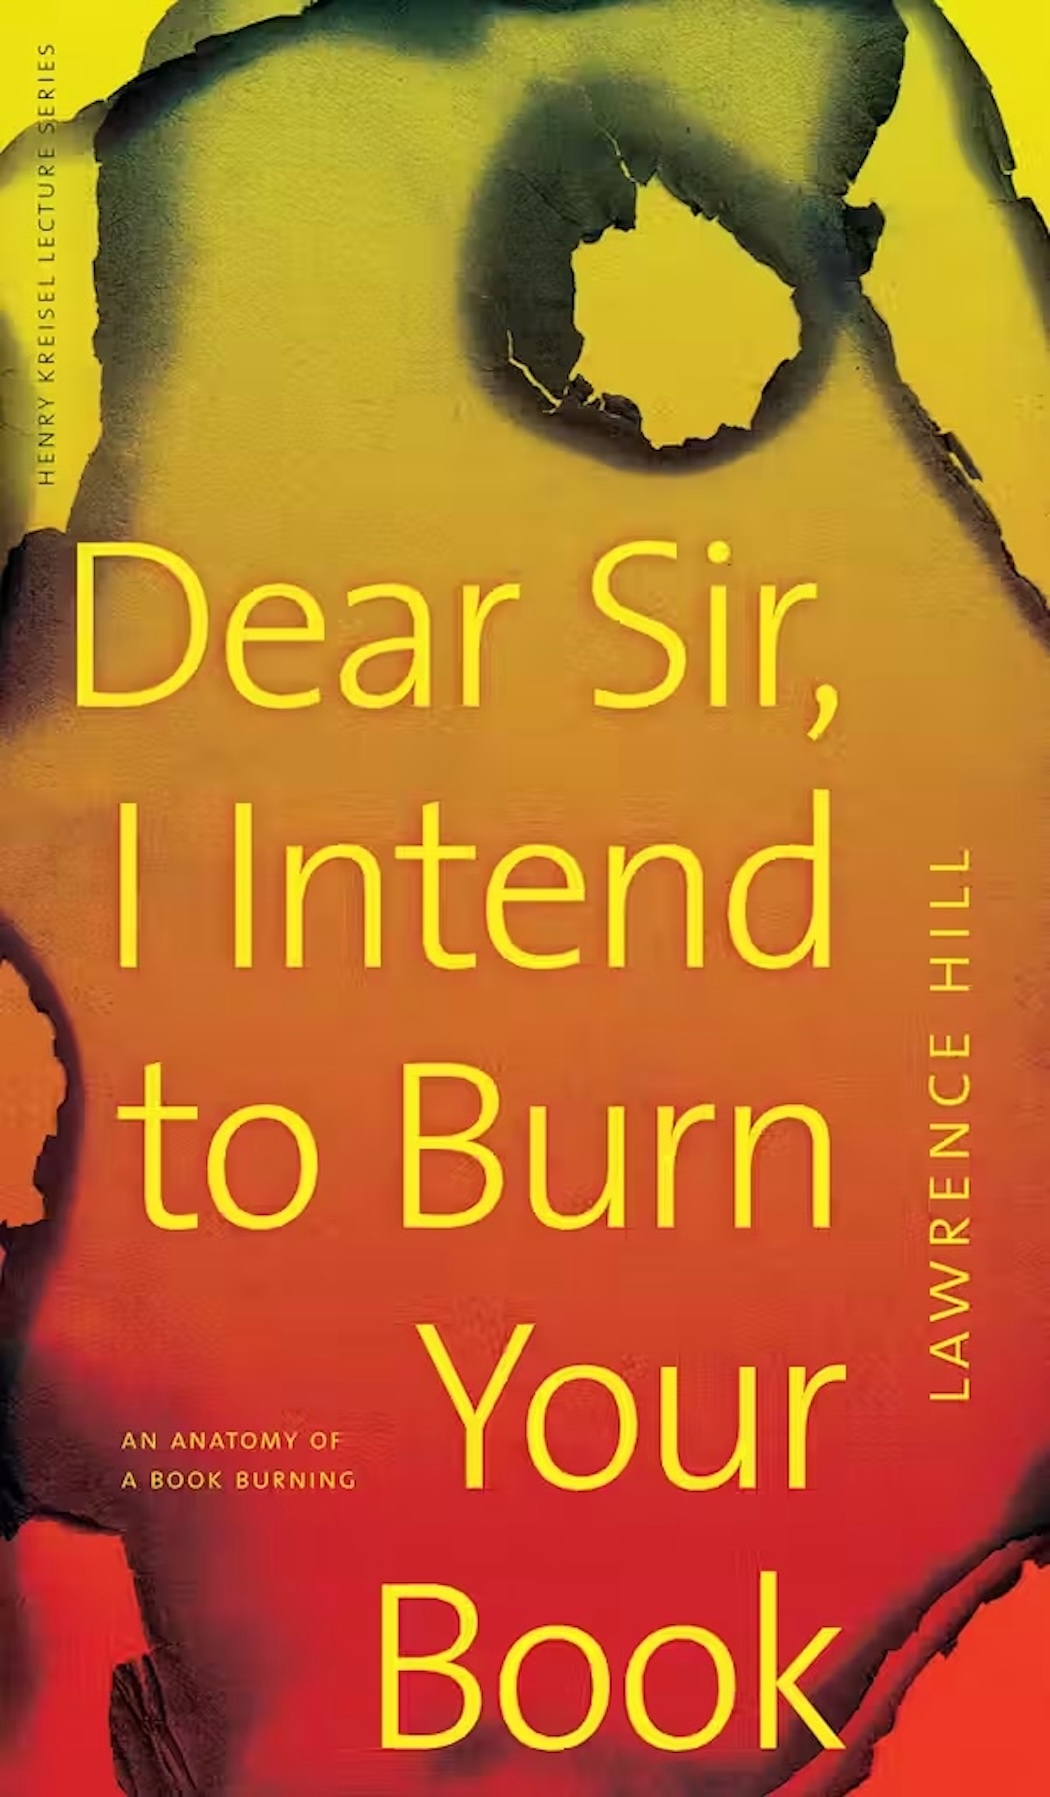 Cover Image of Lawrence Hill's Kreisel Publication Titled Dear Sir, I Intend to Burn Your Book